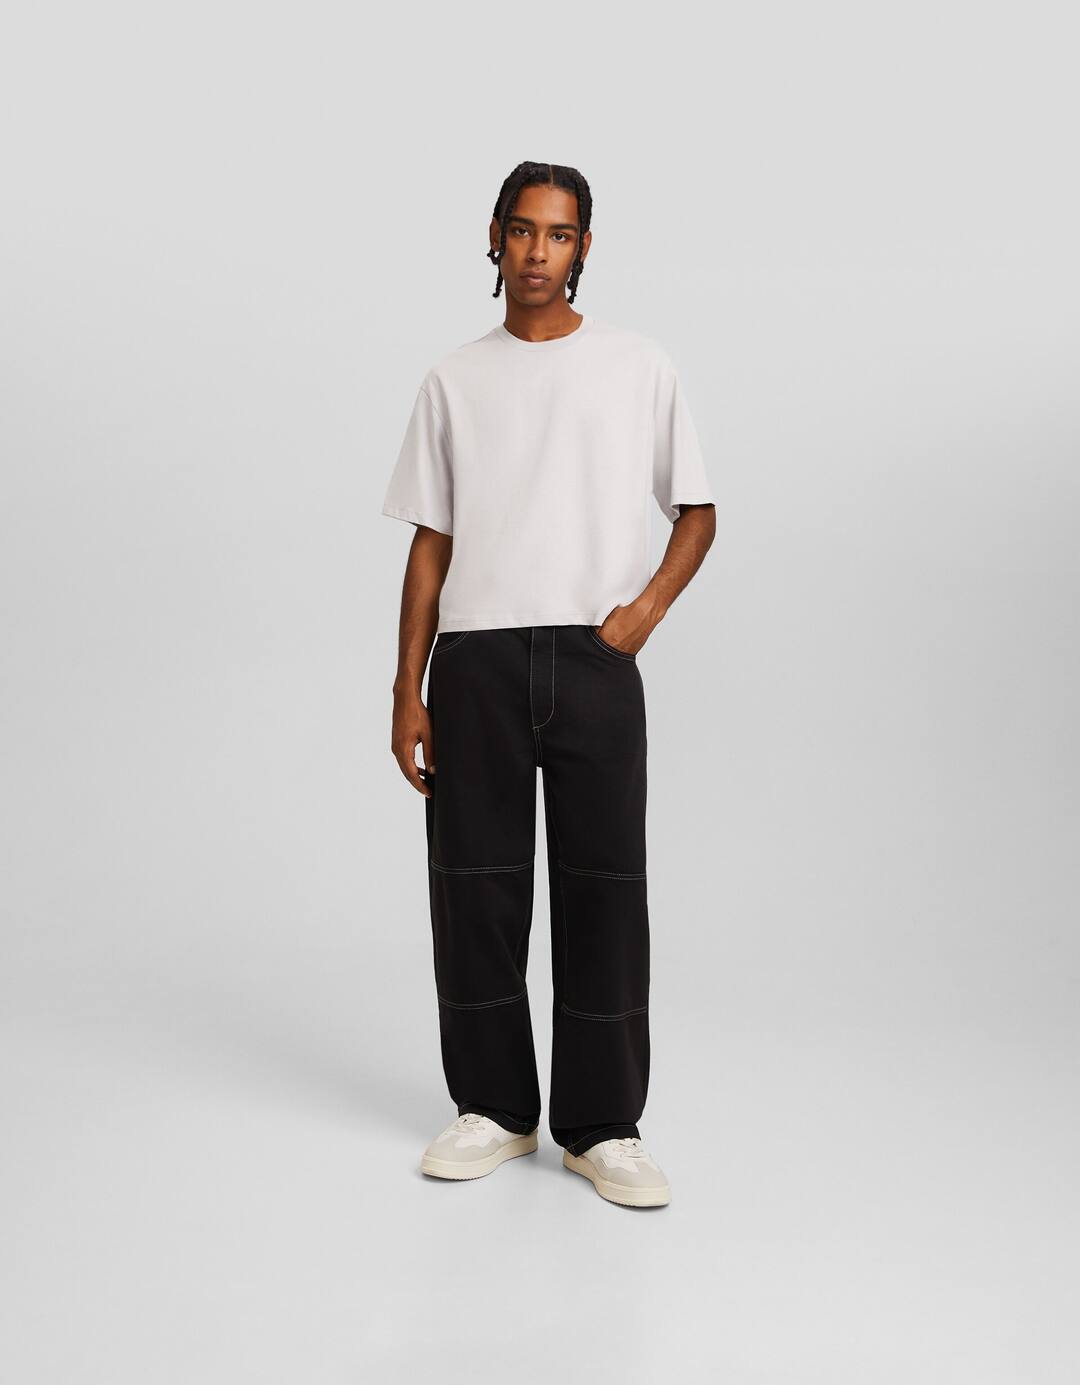 Baggy skater trousers